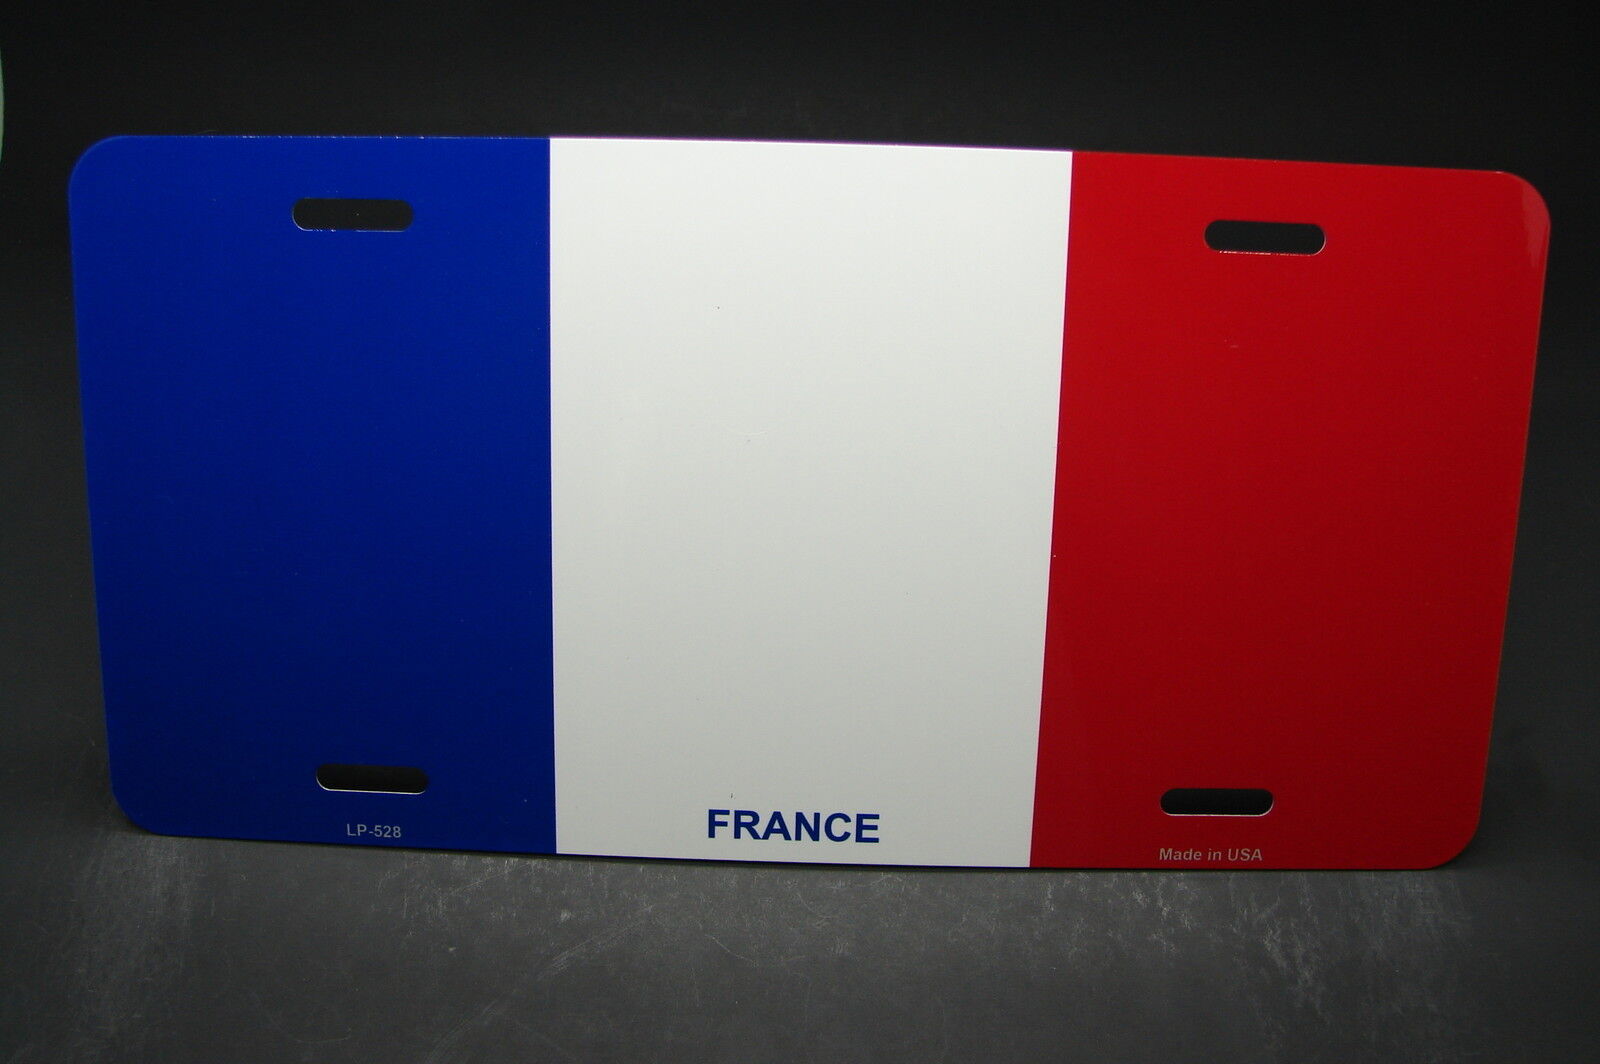 FRANCE FLAG METAL CAR LICENSE PLATE. FRENCH FLAG CAR LICENSE PLATE, TRICOLORE